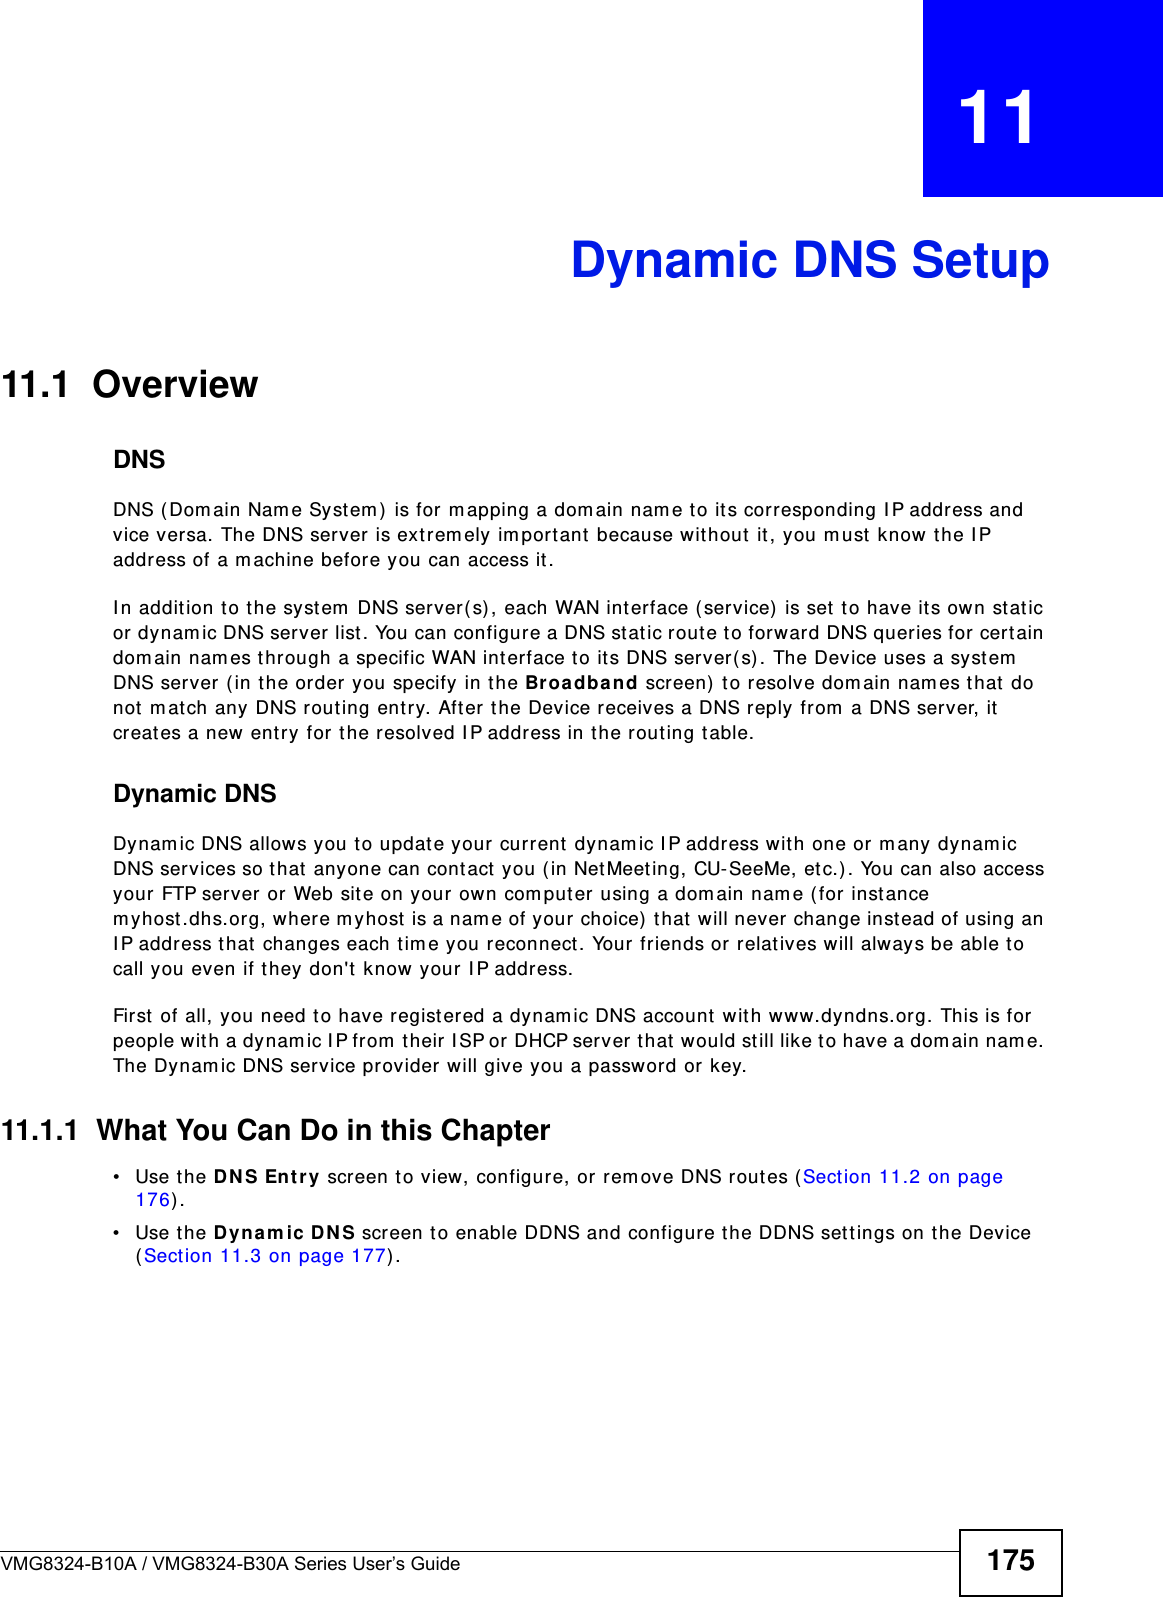 VMG8324-B10A / VMG8324-B30A Series User’s Guide 175CHAPTER   11Dynamic DNS Setup11.1  Overview DNSDNS (Dom ain Nam e Syst em )  is for m apping a dom ain nam e to it s corresponding I P address and vice versa. The DNS server is ext rem ely im port ant because wit hout  it , you m ust  know the I P address of a m achine before you can access it . I n addit ion to the syst em  DNS server( s), each WAN int erface (service)  is set  to have it s own st atic or dynam ic DNS server list . You can configure a DNS st atic route to forward DNS queries for cert ain dom ain nam es through a specific WAN int erface to it s DNS server( s) . The Device uses a system  DNS server ( in t he order you specify in t he Broa dband screen)  t o resolve dom ain nam es t hat  do not  m atch any DNS rout ing entry. Aft er t he Device receives a DNS reply from  a DNS server, it  creates a new ent ry for t he resolved I P address in the rout ing t able.Dynamic DNSDynam ic DNS allows you t o update your  current  dynam ic I P address w ith one or m any dynam ic DNS services so that anyone can cont act  you ( in Net Meet ing, CU-SeeMe, etc.) . You can also access your FTP server or Web site on your own com put er using a dom ain nam e ( for inst ance m yhost .dhs.org, where m yhost  is a nam e of your choice)  t hat will never change inst ead of using an I P address t hat  changes each t im e you reconnect . Your friends or relat ives will always be able t o call you even if they don&apos;t  know your I P address.First of all, you need t o have regist ered a dynam ic DNS account with www.dyndns.org. This is for people wit h a dynam ic I P from  t heir I SP or DHCP server t hat  would still like t o have a dom ain nam e. The Dynam ic DNS service provider will give you a password or key. 11.1.1  What You Can Do in this Chapter• Use the D N S Entr y screen to view, configure, or rem ove DNS routes (Sect ion 11.2 on page 176) .• Use the D yna m ic DN S screen t o enable DDNS and configure t he DDNS sett ings on t he Device (Sect ion 11.3 on page 177) .